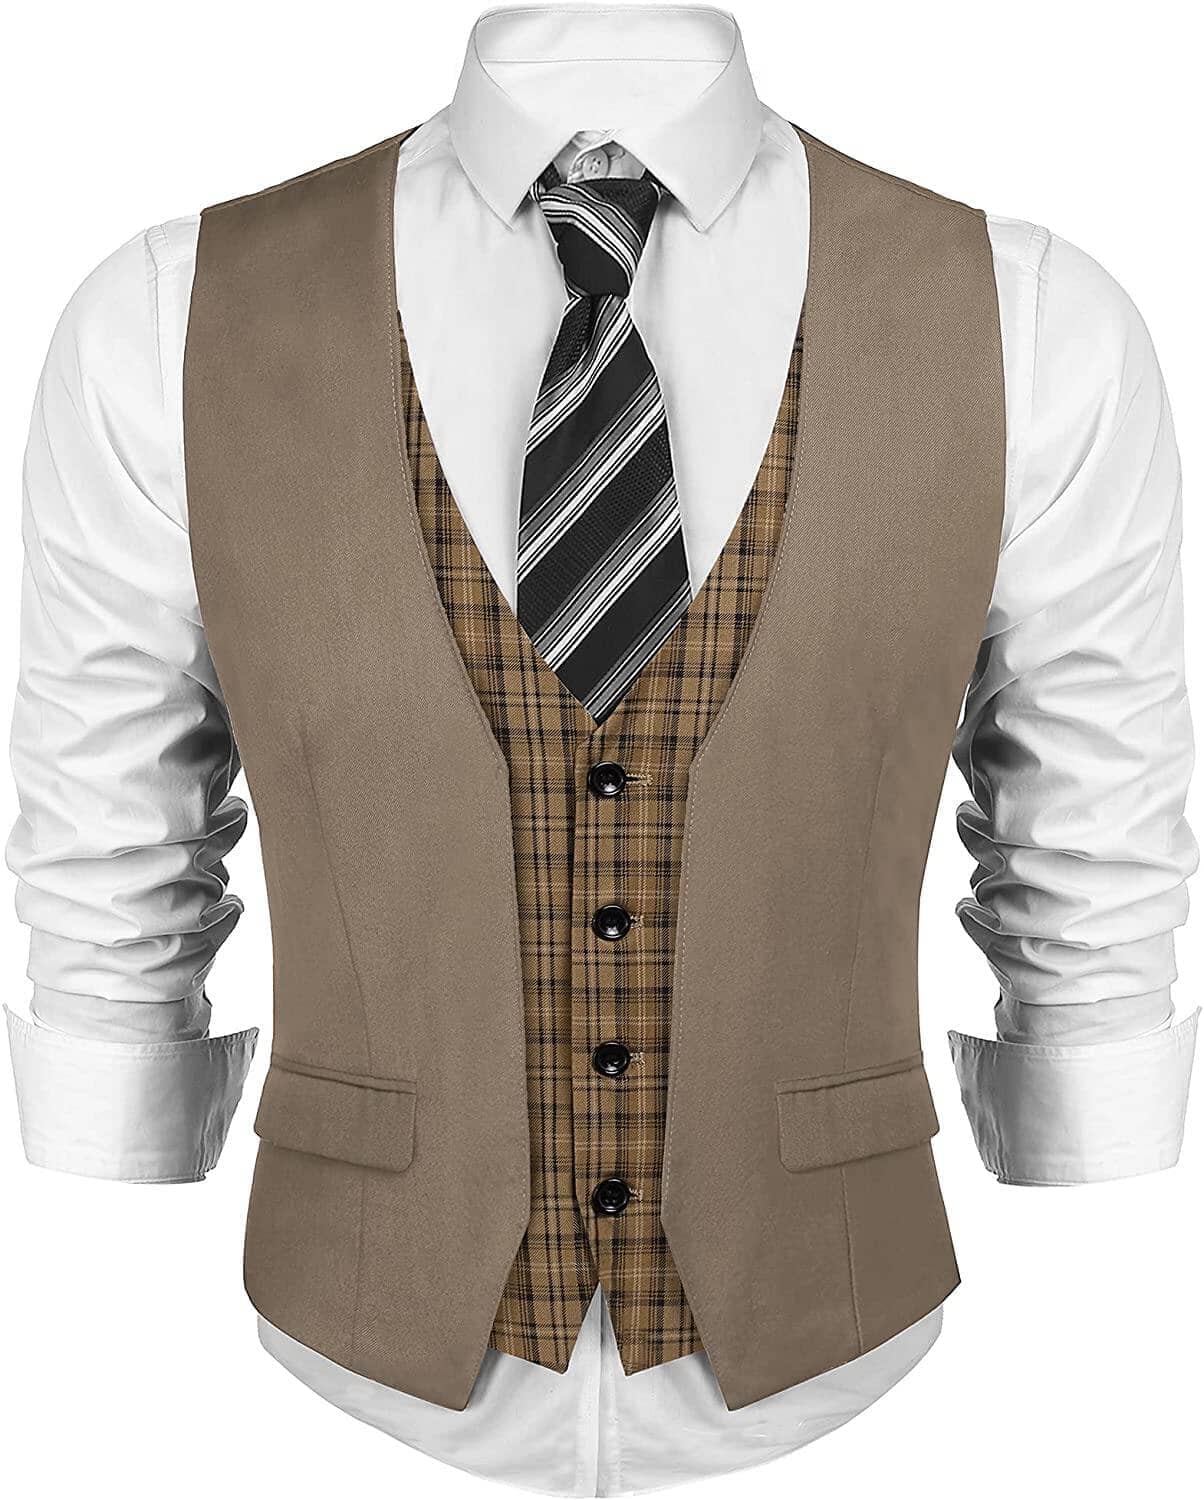 Stylish Business Suit Vest for Men - Perfect for Weddings and Parties ...